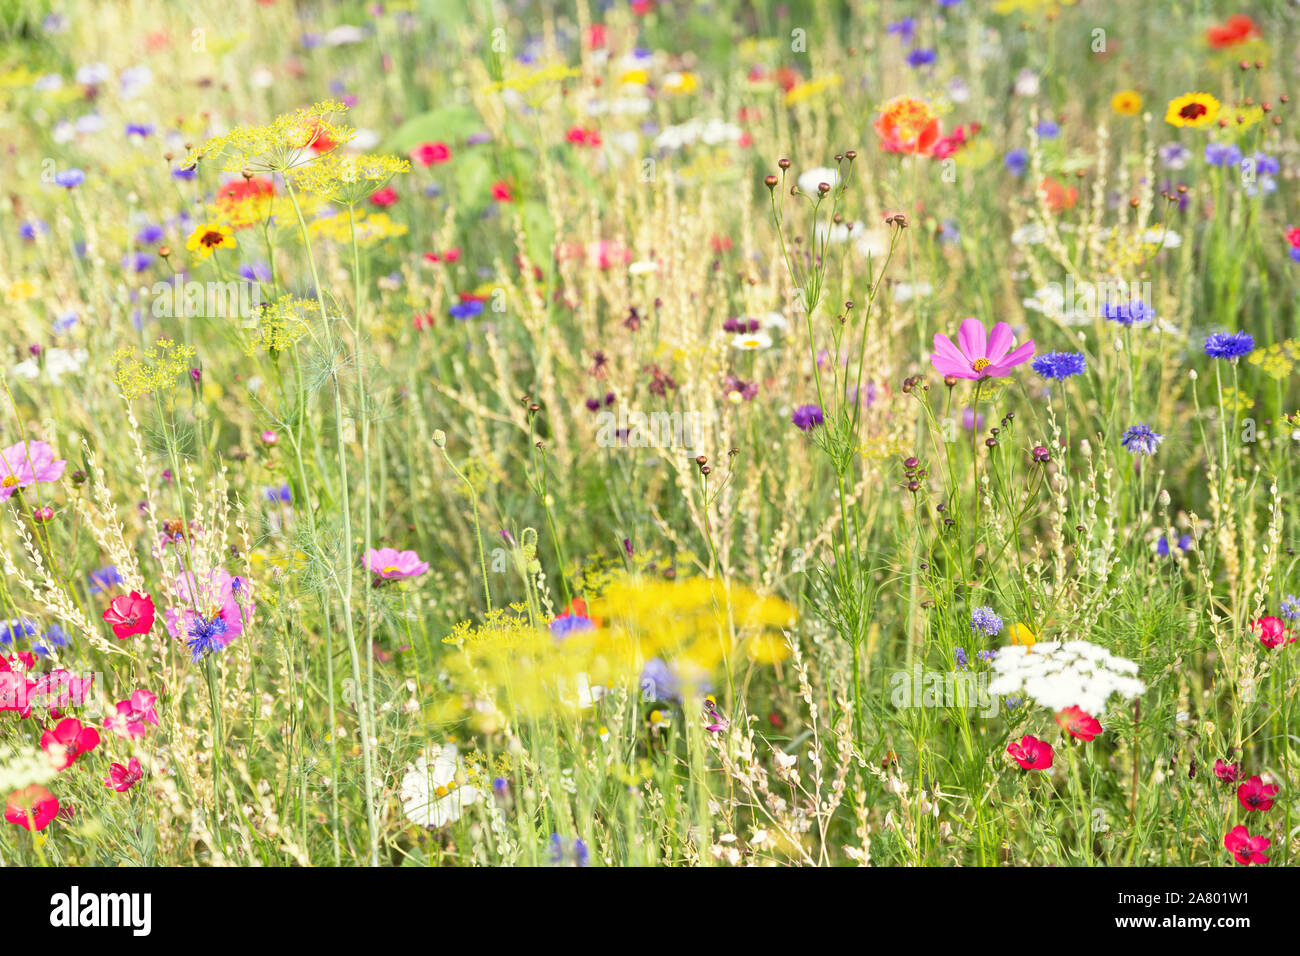 Natural habitat for bees and butterflies, protection with native flowers and herbs, spring or summer season Stock Photo